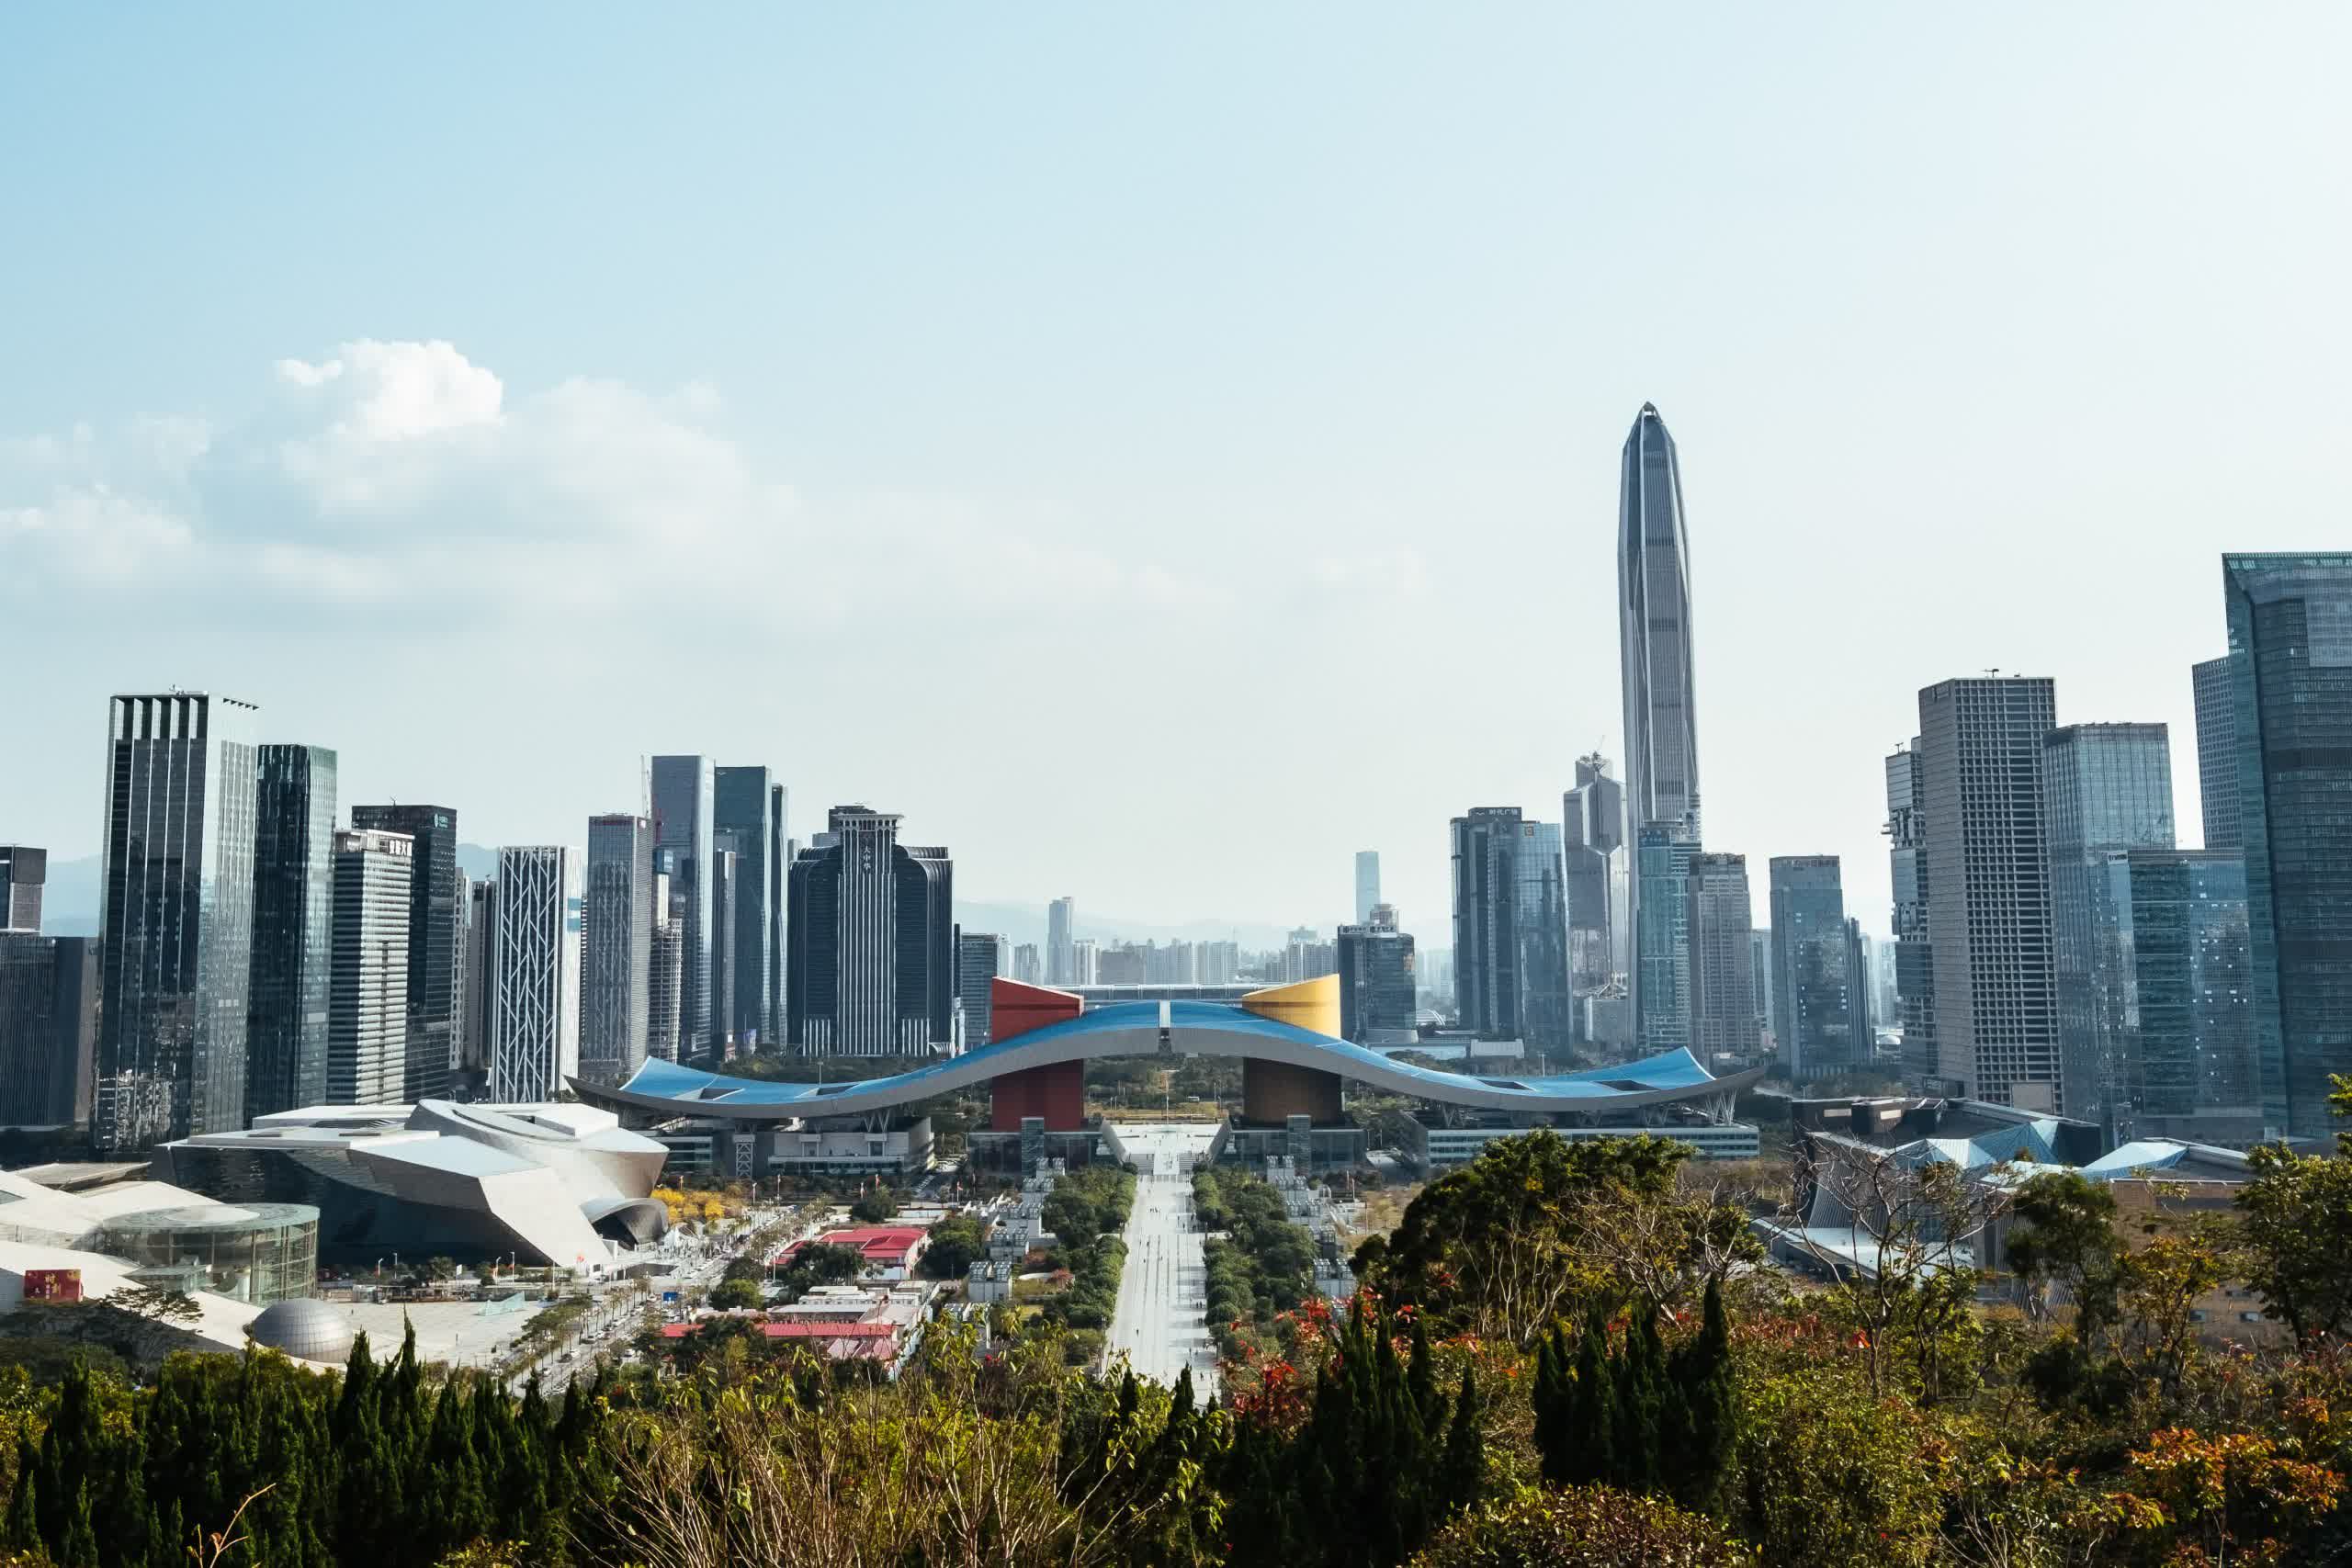 China's supply chain: Shenzhen wasn't built in a day